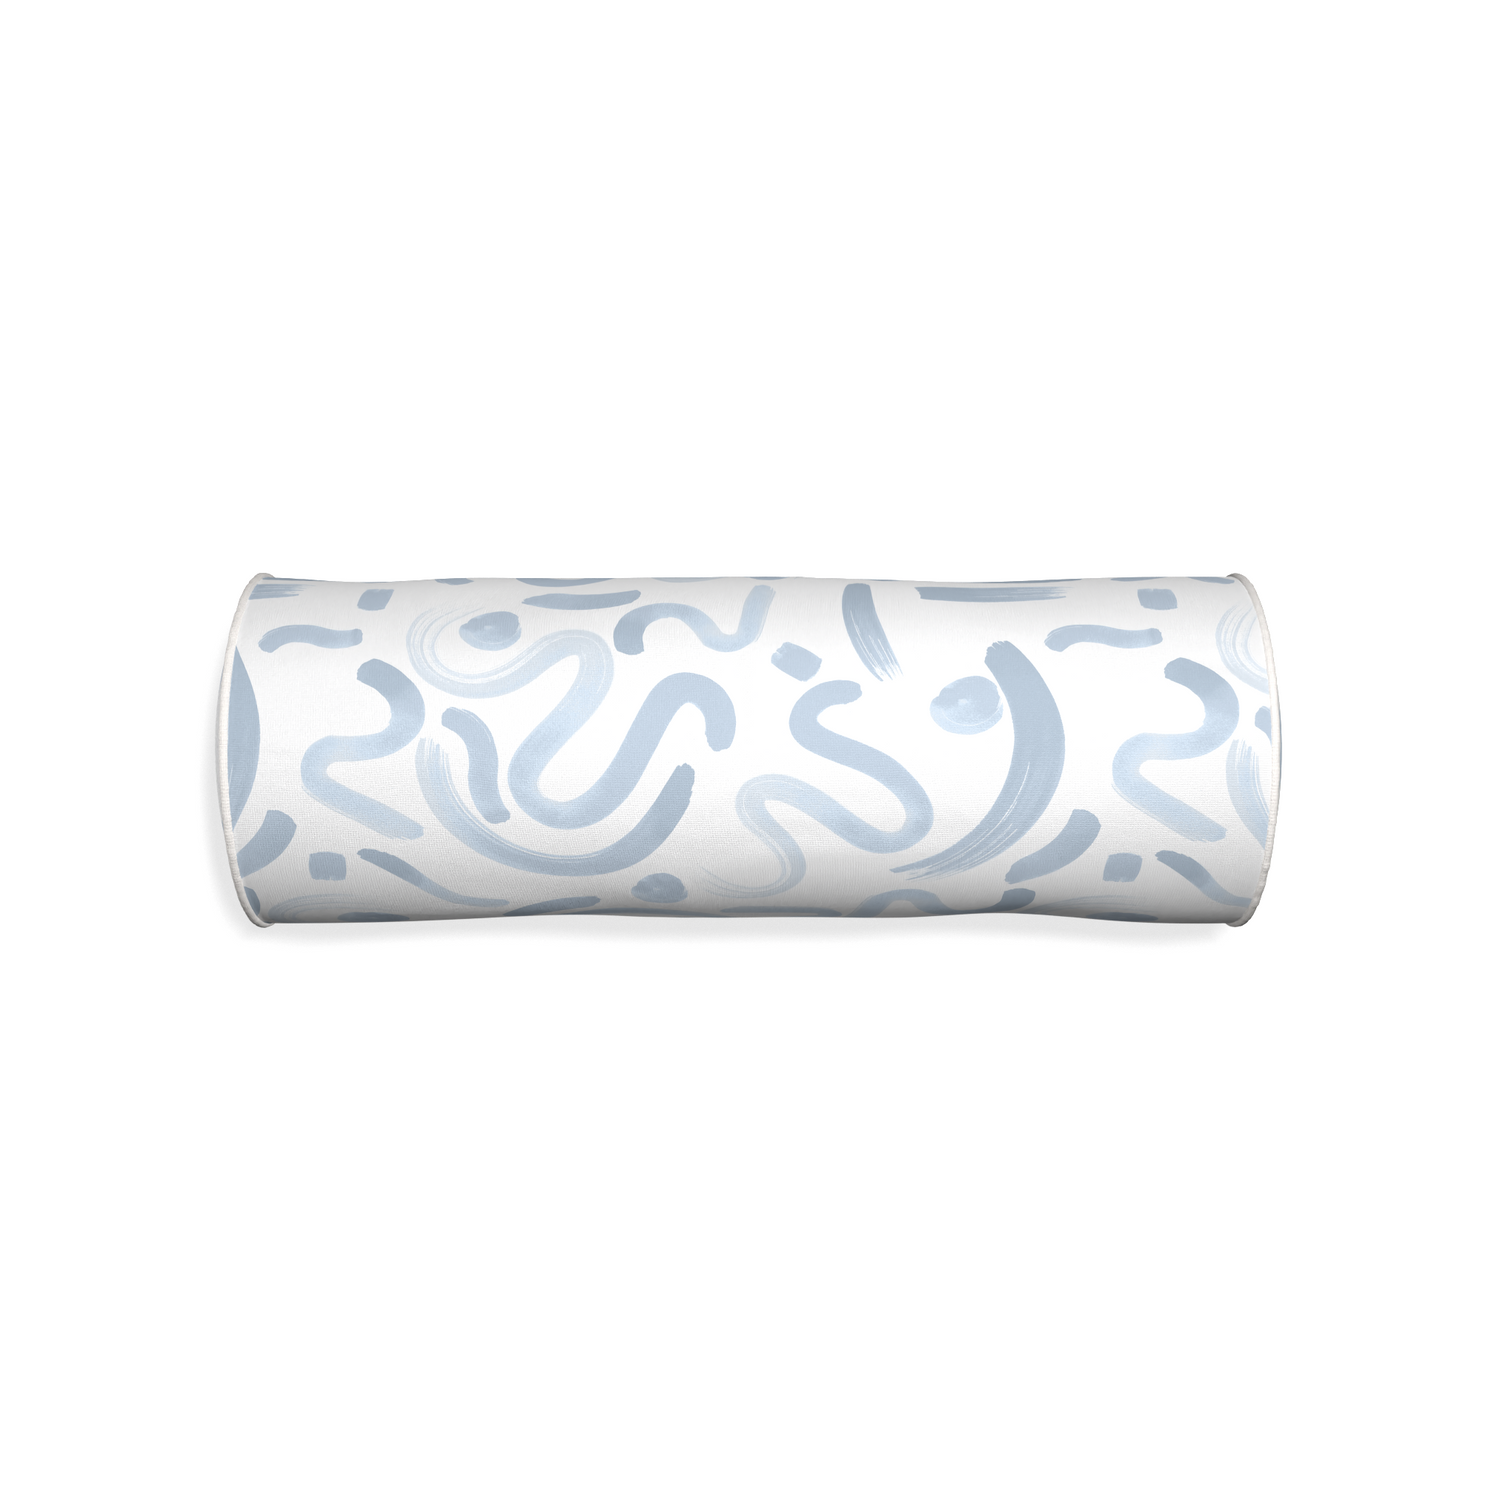 Bolster hockney sky custom abstract sky bluepillow with snow piping on white background